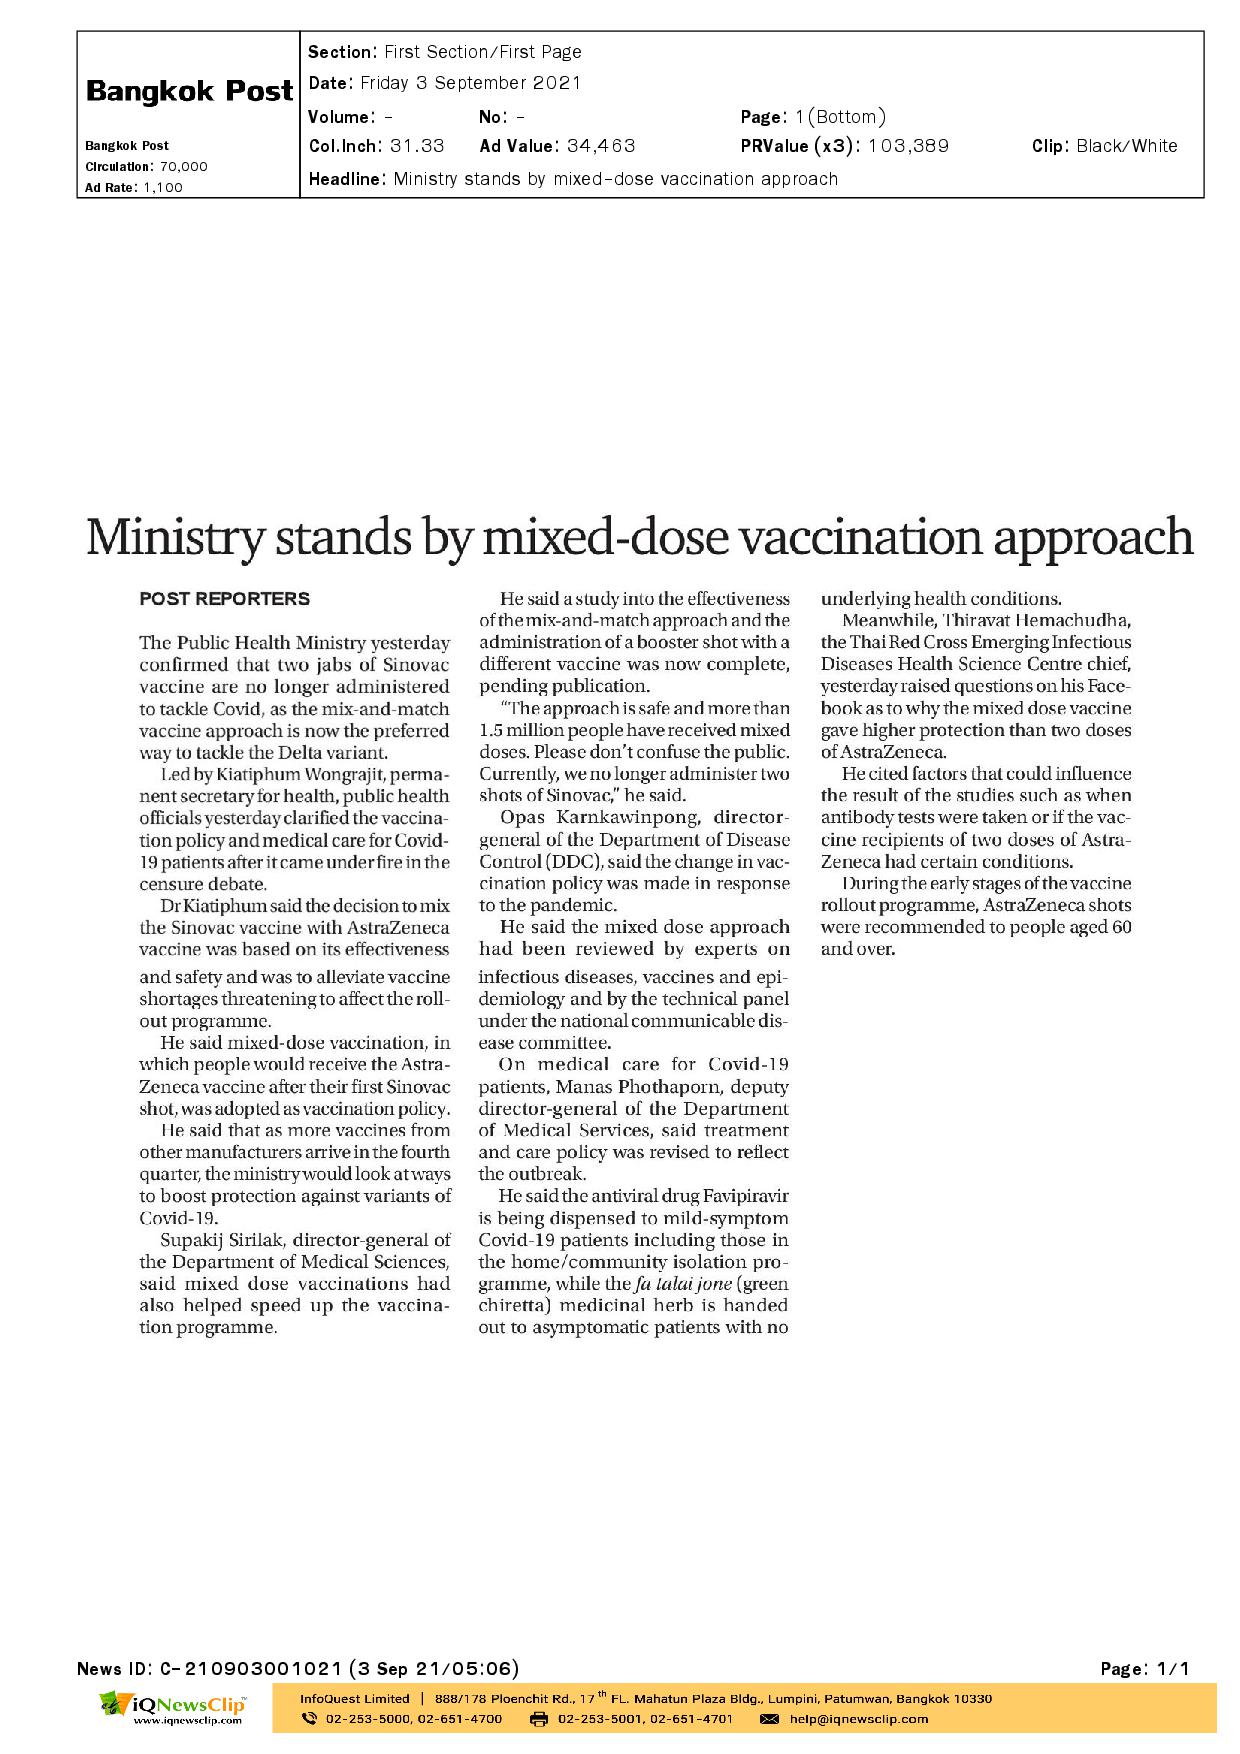 Ministry stands by mixed-dose vaccination approach